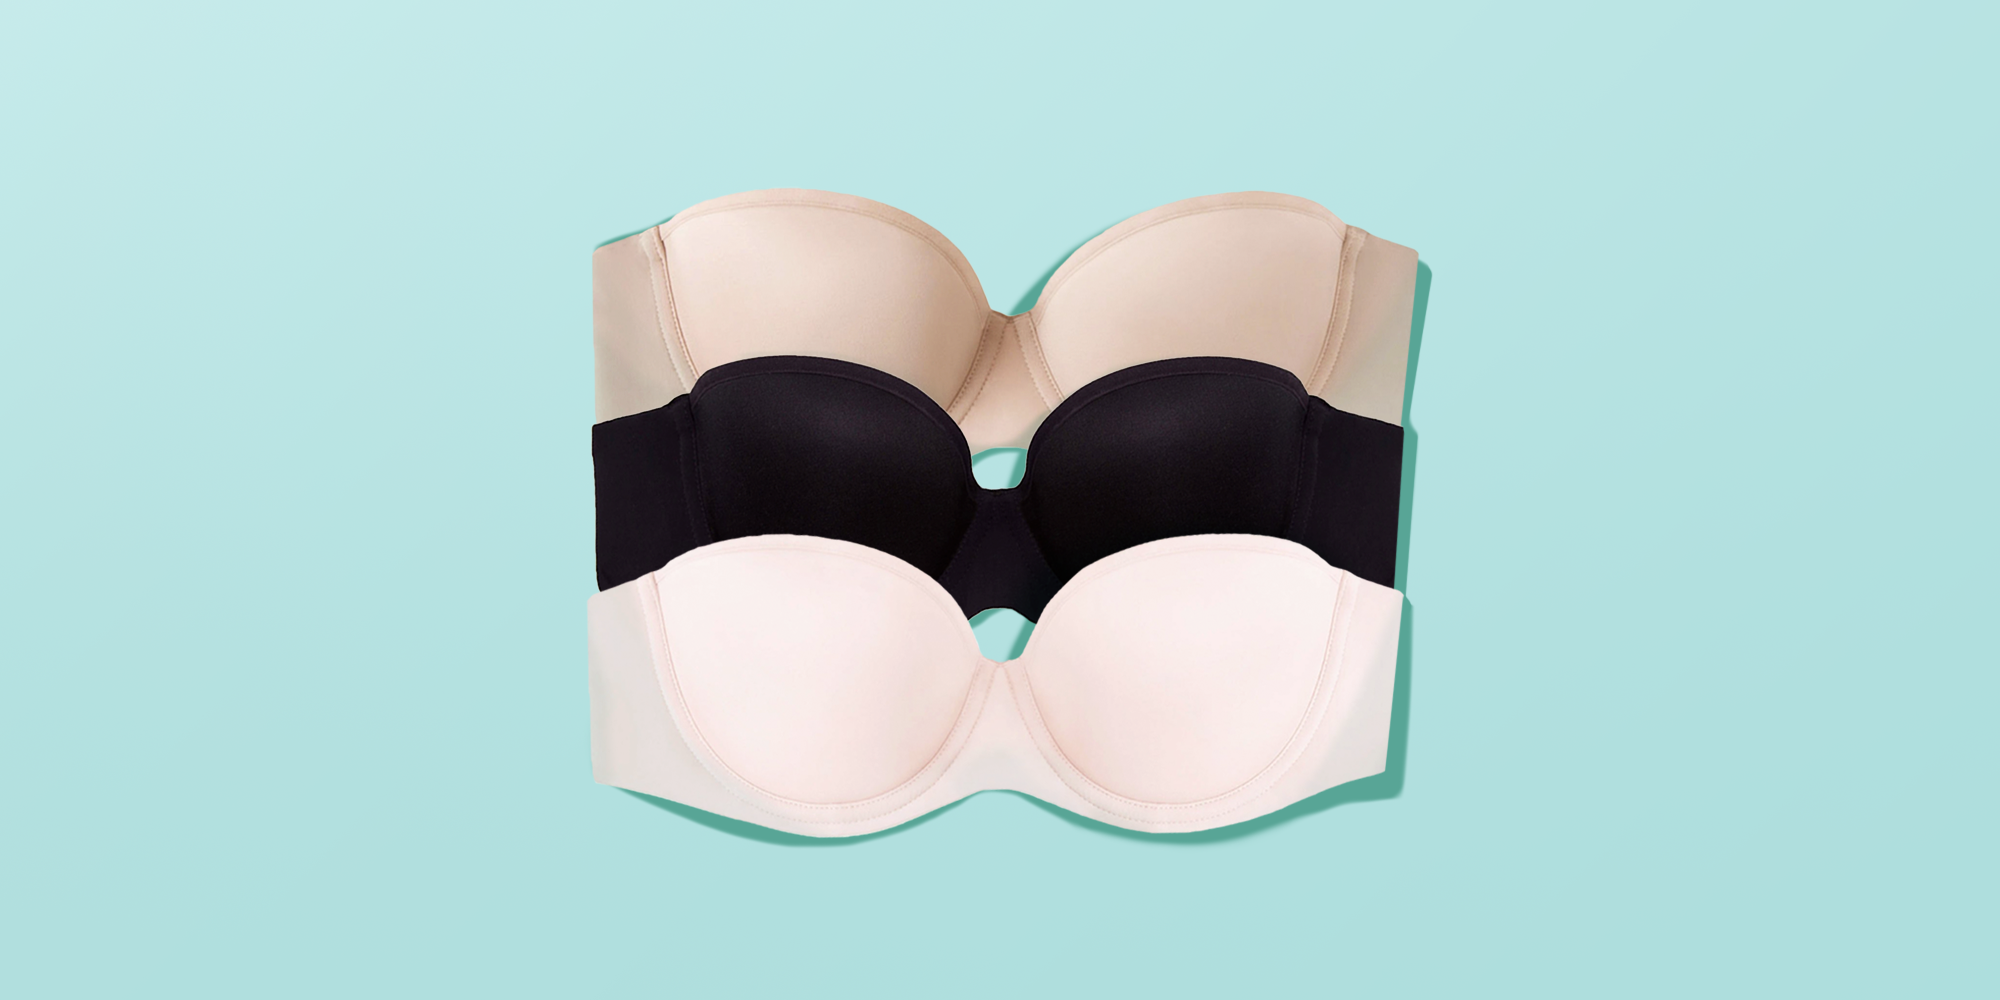 How To Measure Your Bra Size at Home: a 5-Step Guide